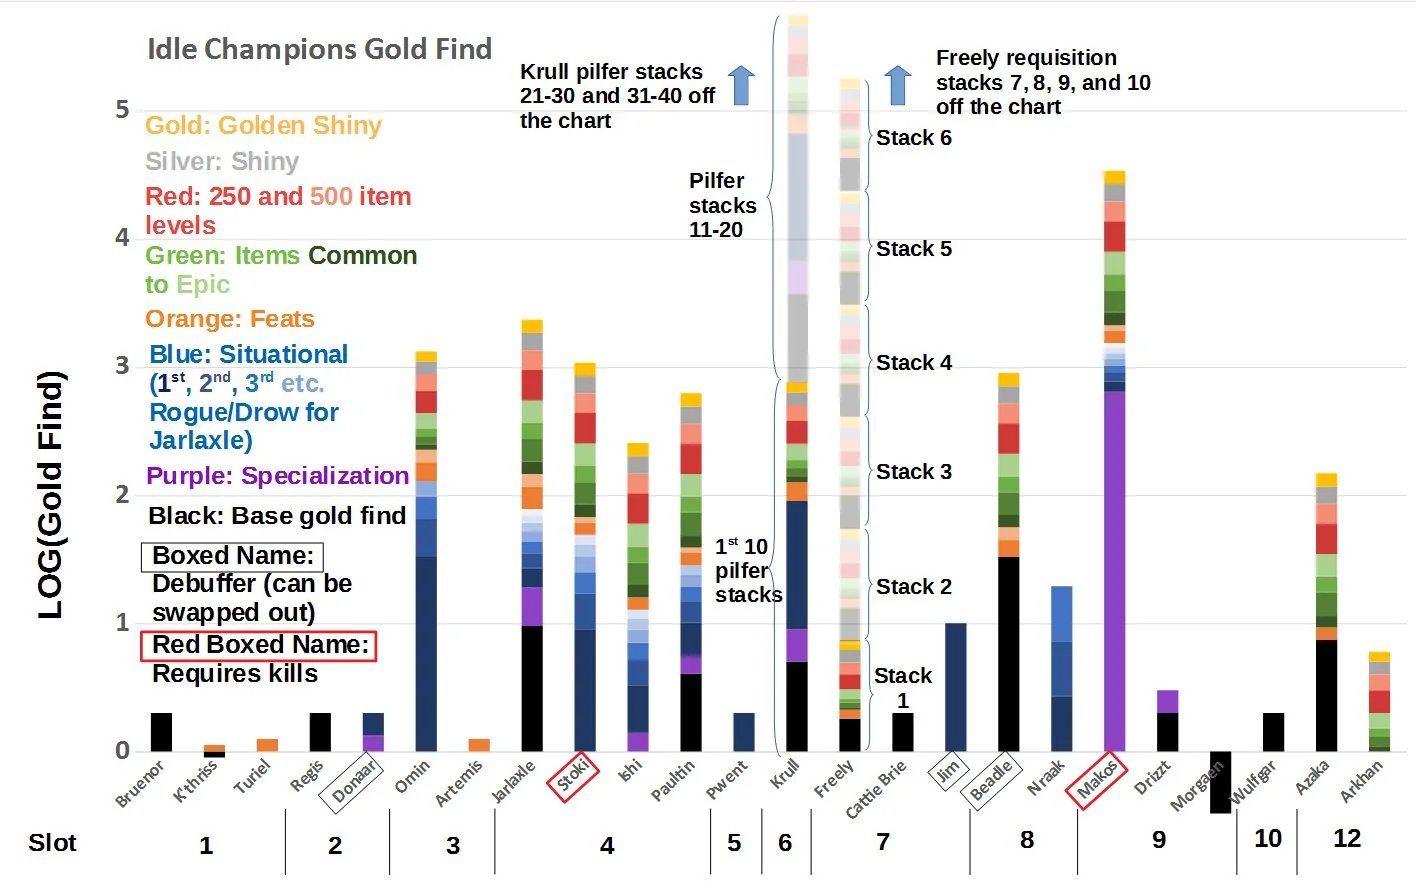 A quick visual guide to the best possible gold find formations group and champions for Idle Champions of the Forgotten Realms.